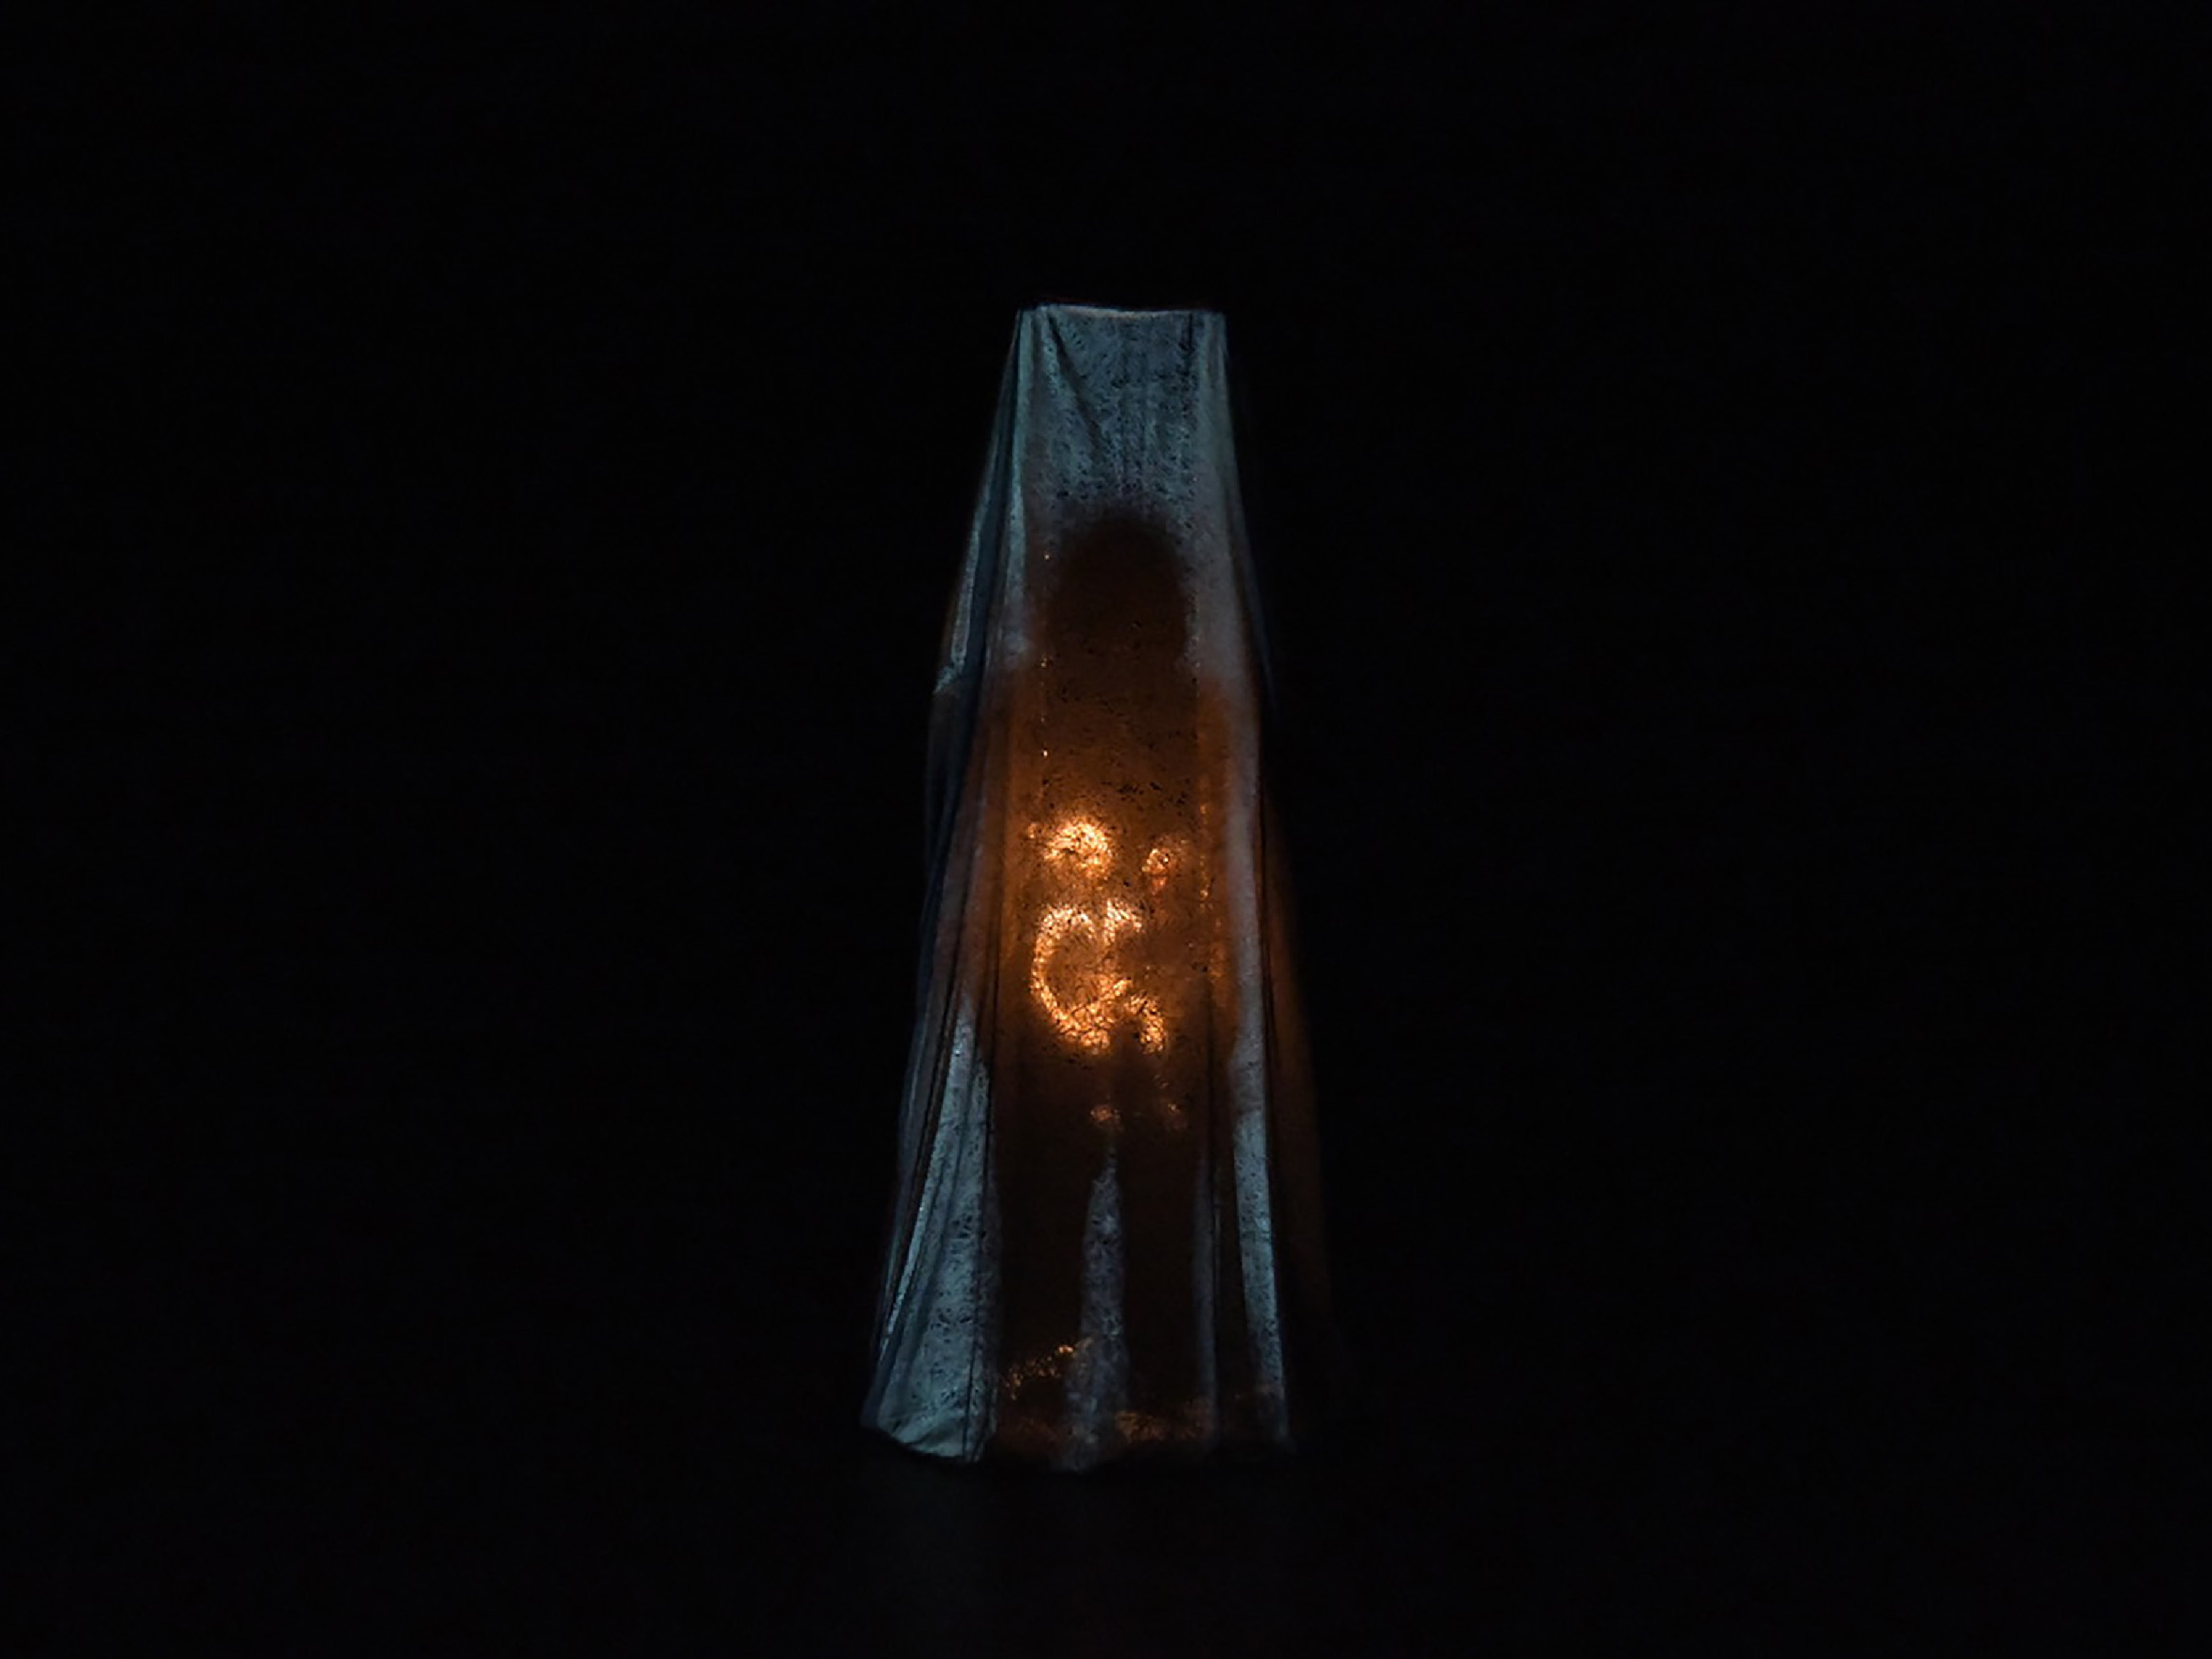 Behind a curtain stands a dark, human shadow with a small doll in its abdominal region illuminated and shining brightly through the curtain. No details are visible through the coarse fabric of the curtain.